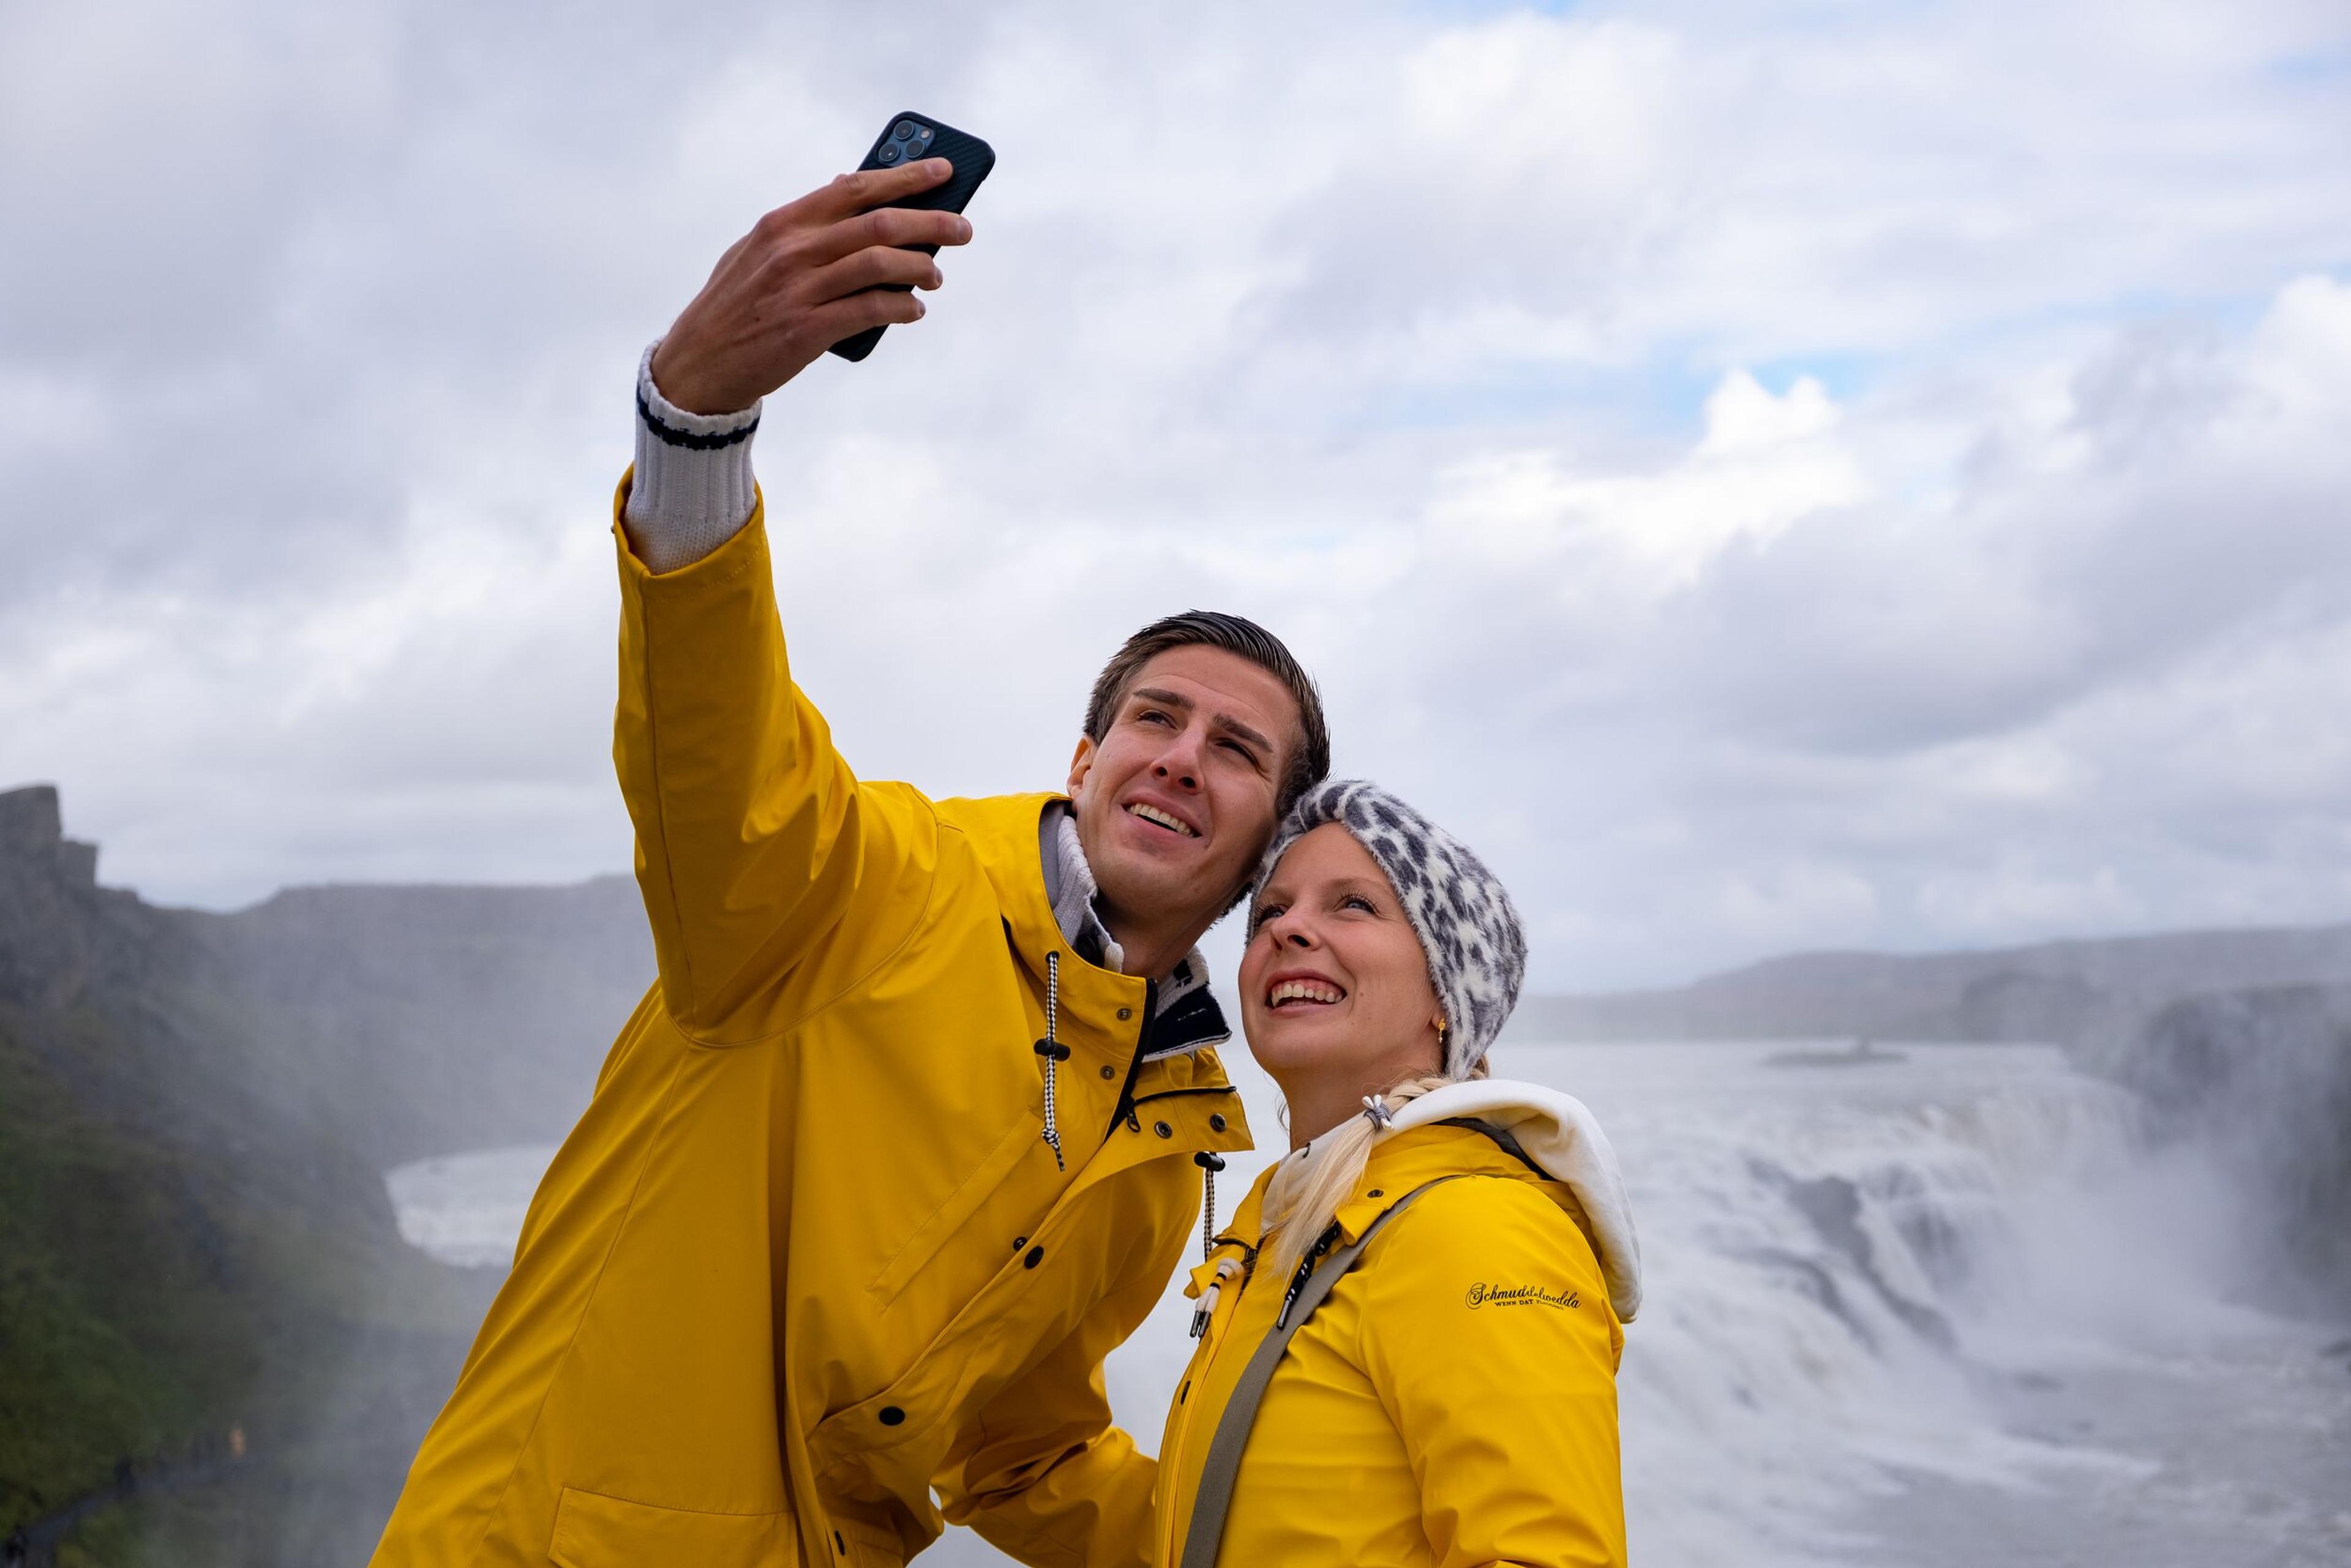 A smiling couple in matching yellow raincoats takes a selfie with the misty Gullfoss waterfall in the background, capturing a moment of joyous adventure.